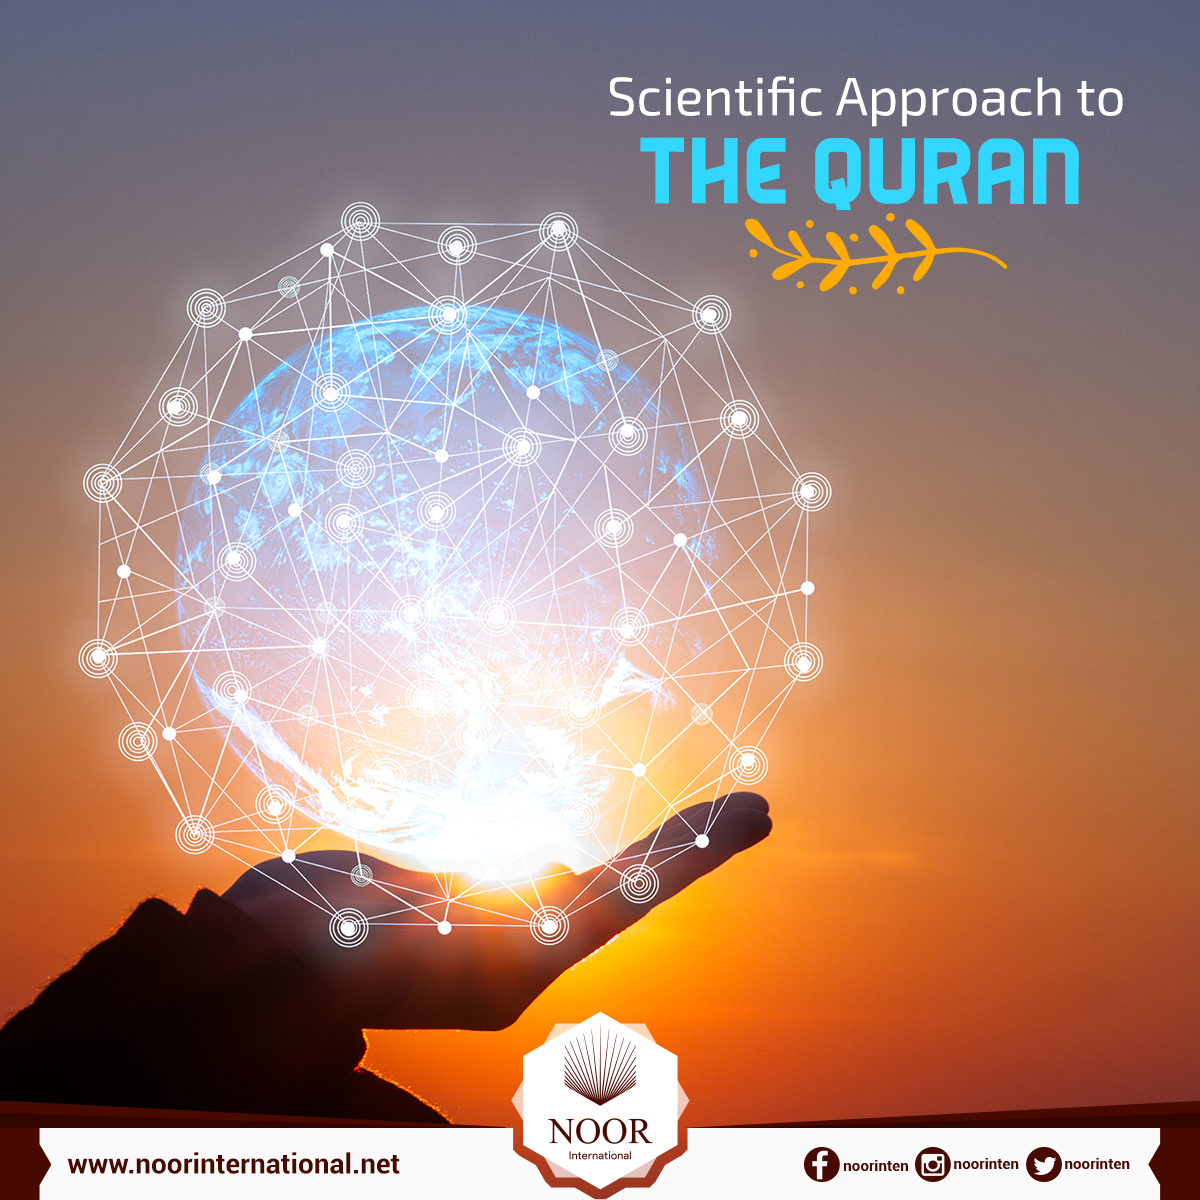 Scientific Approach to the Quran